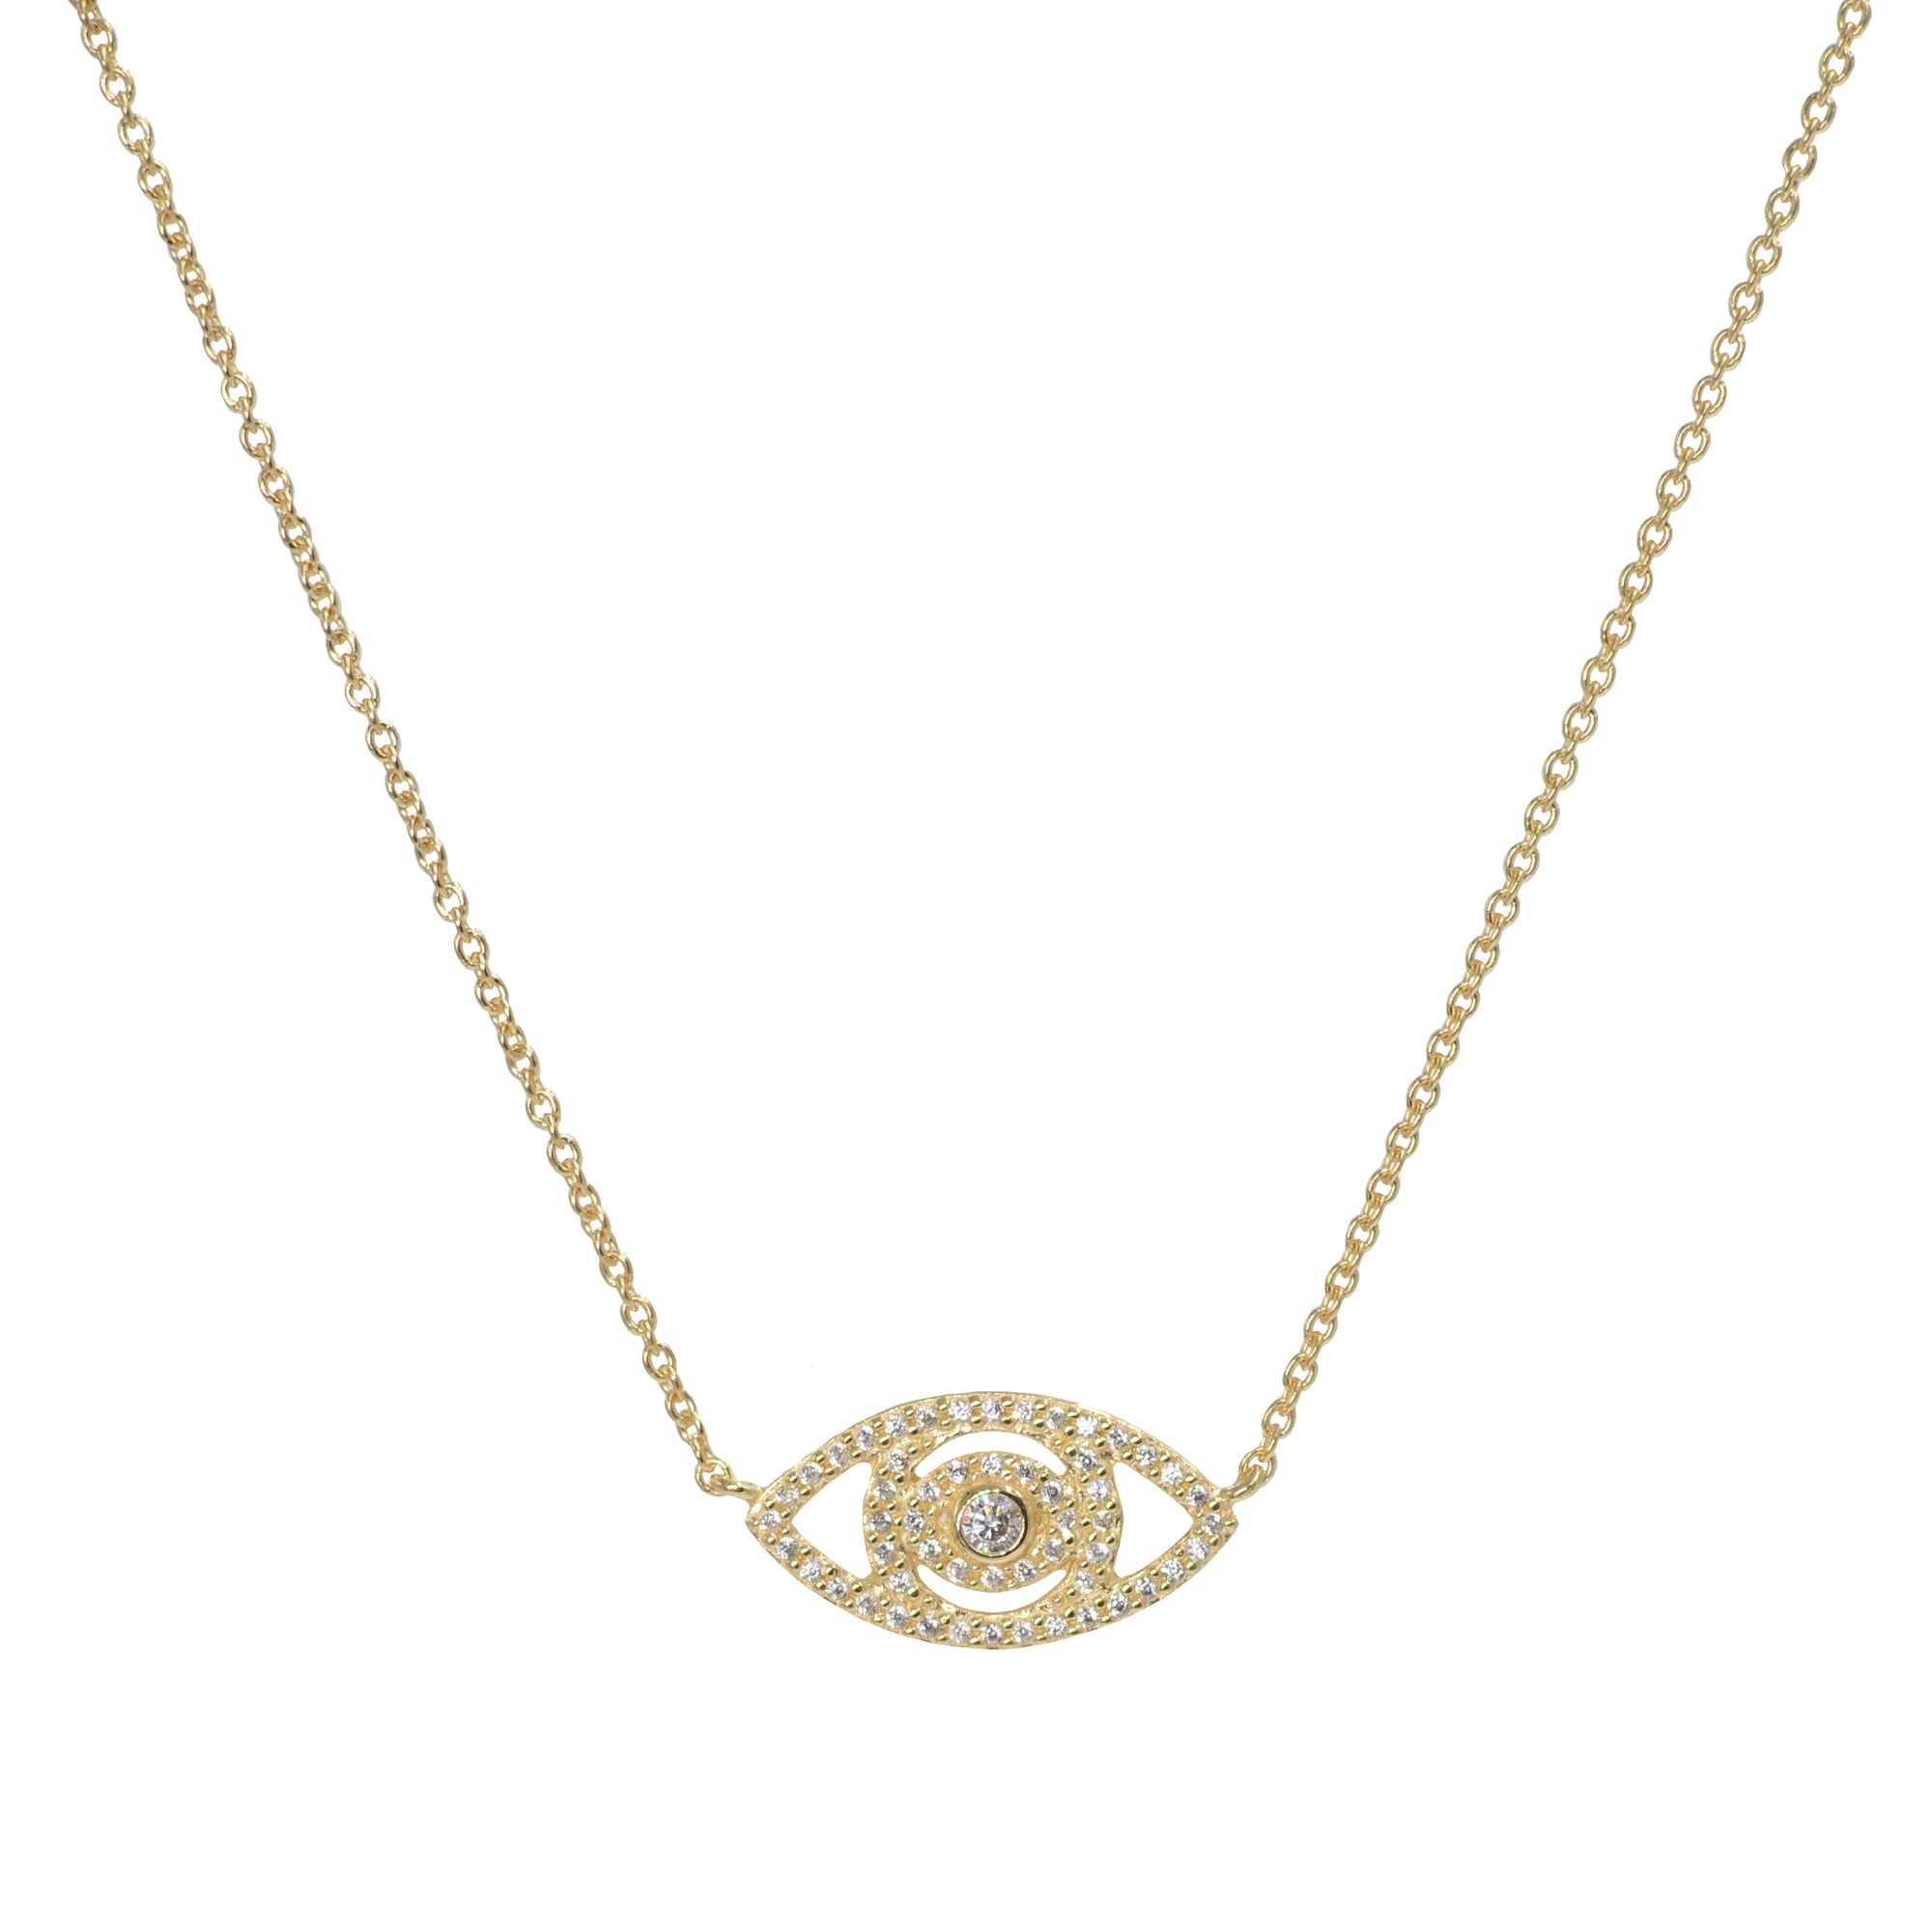 Evil Eye Necklace With Crystals